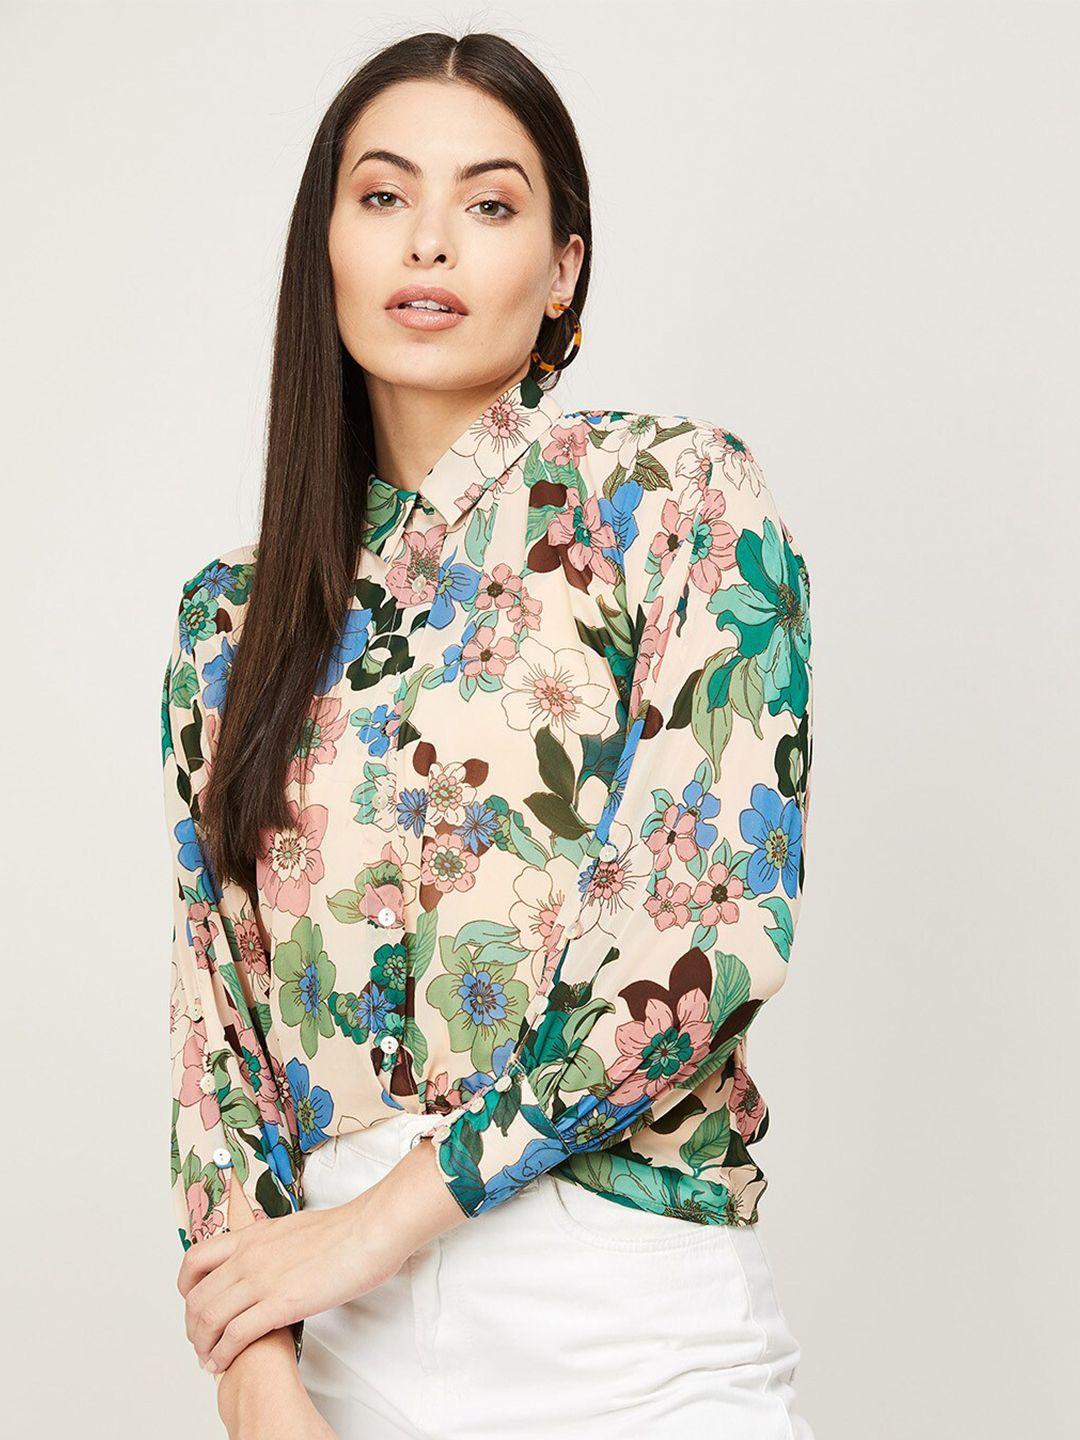 code by lifestyle women beige floral printed shirt style top